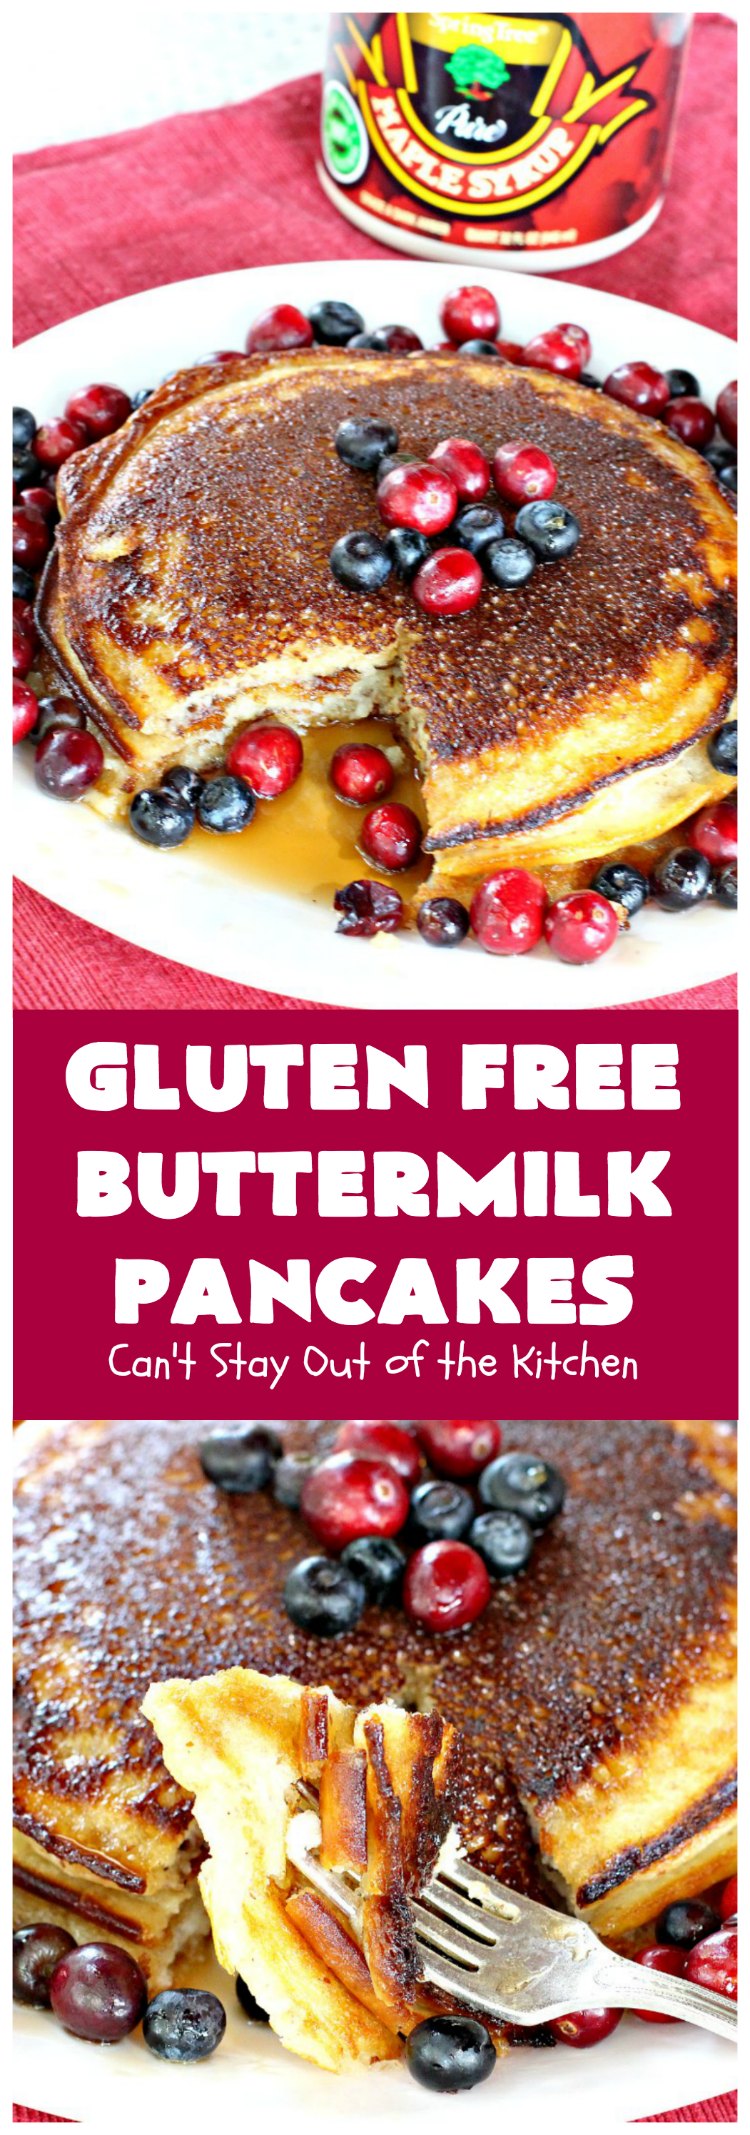 Gluten Free Buttermilk Pancakes | Can't Stay Out of the Kitchen